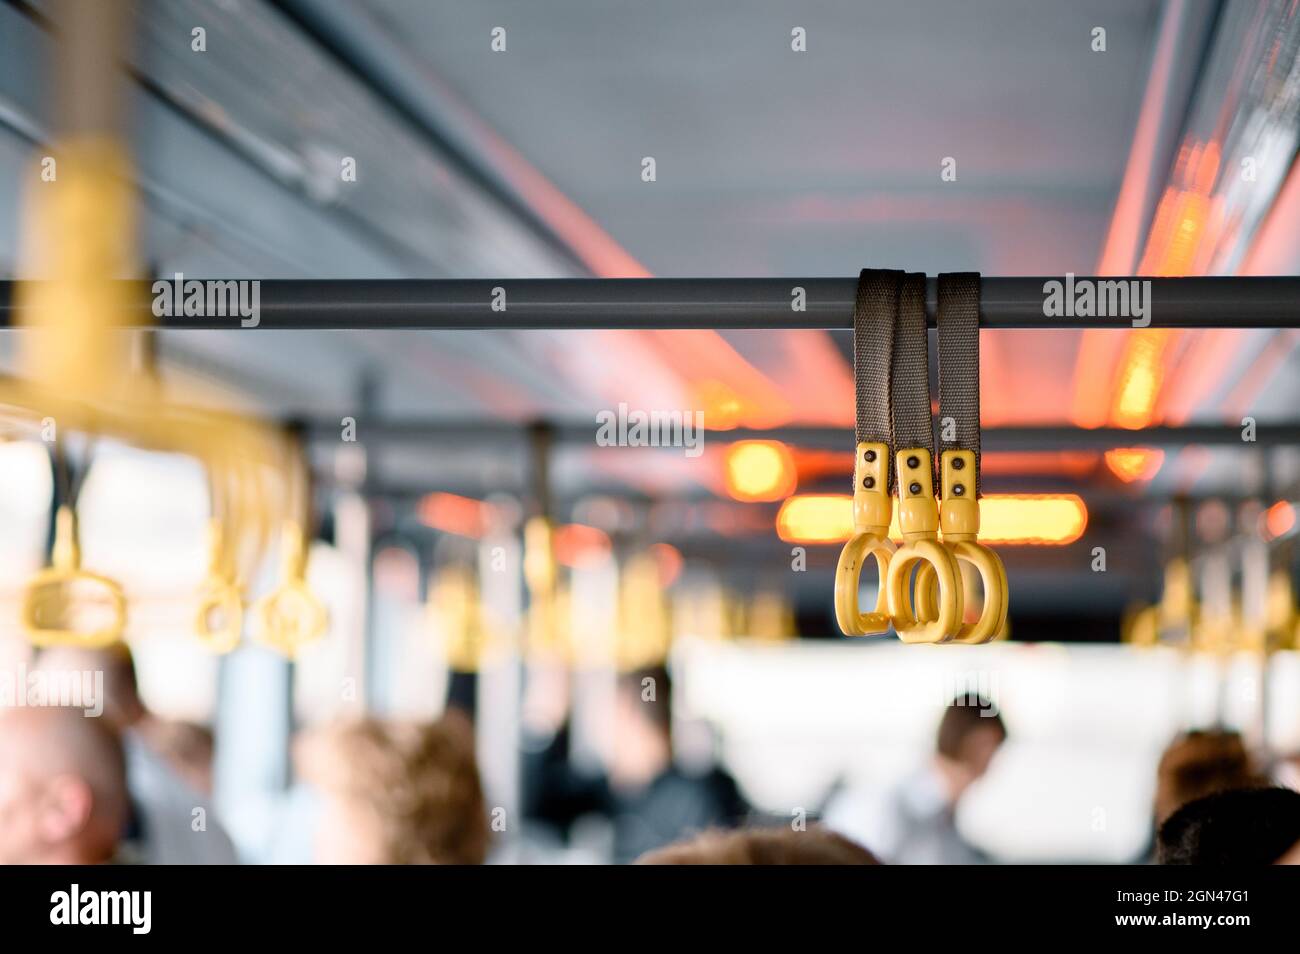 Hanging handhold for standing passengers in a modern train. Suburban and urban transport Stock Photo